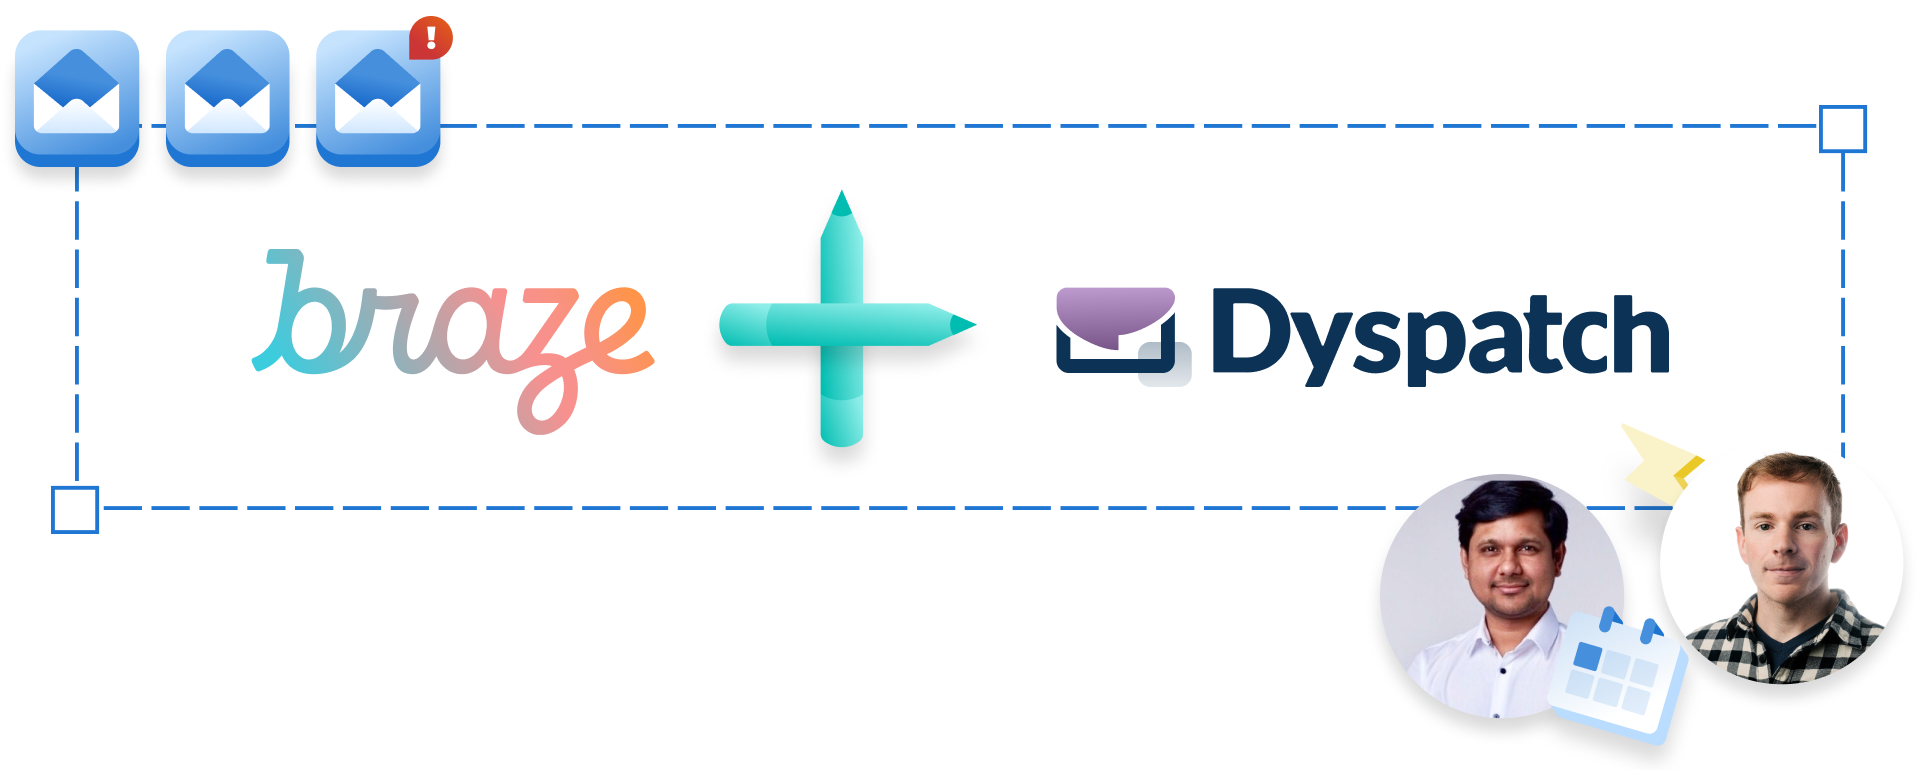 Braze and Dyspatch logos and speaker profile images